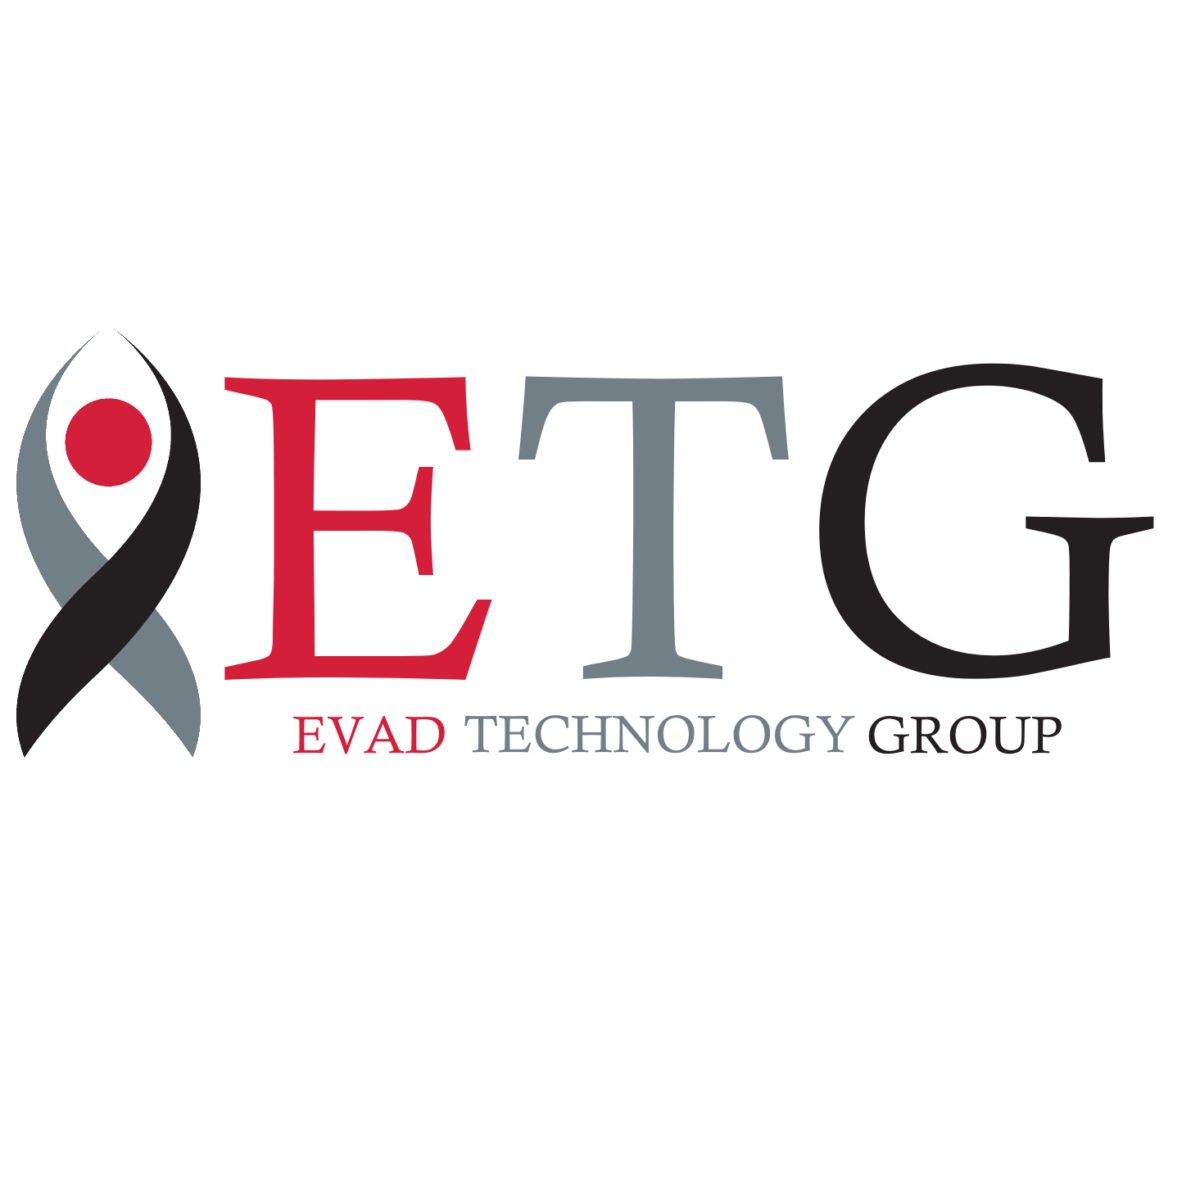 EVAD Technology Group home